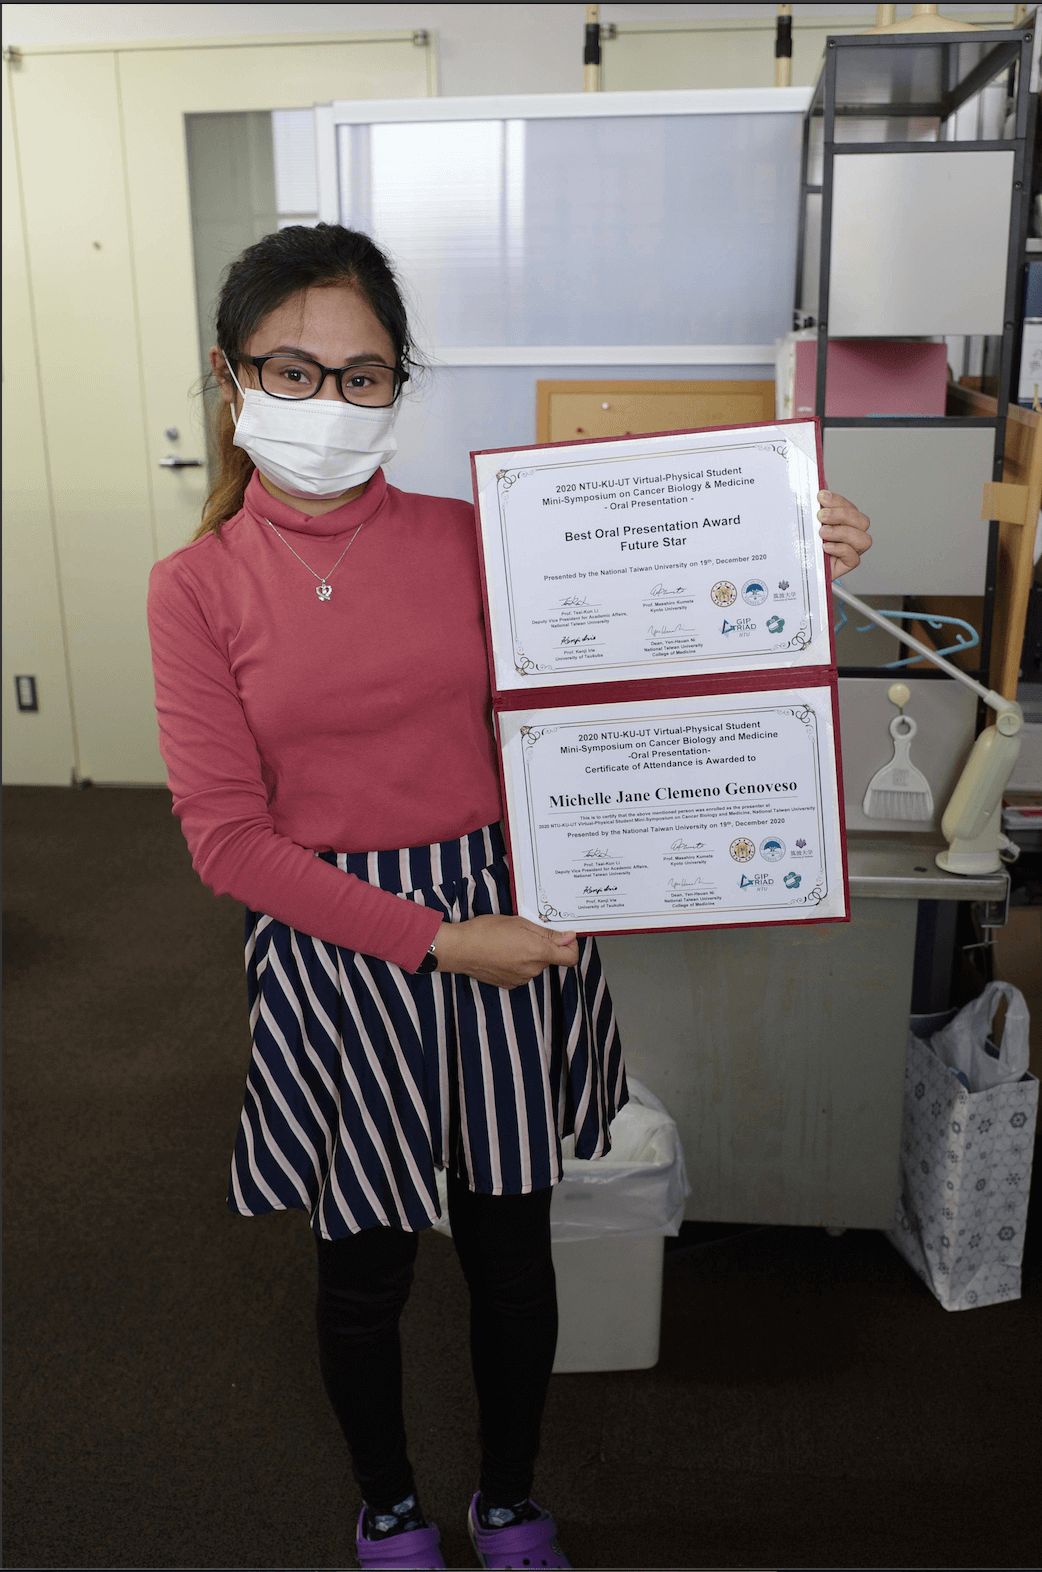 Ms. Michelle Jane Clemeno Genoveso, 3rd year student, received the Best Oral Presentation Award at the 2020 NTU-KU-UT Virtual-Physical students mini-symposium on Cancer Biology and Medicine.